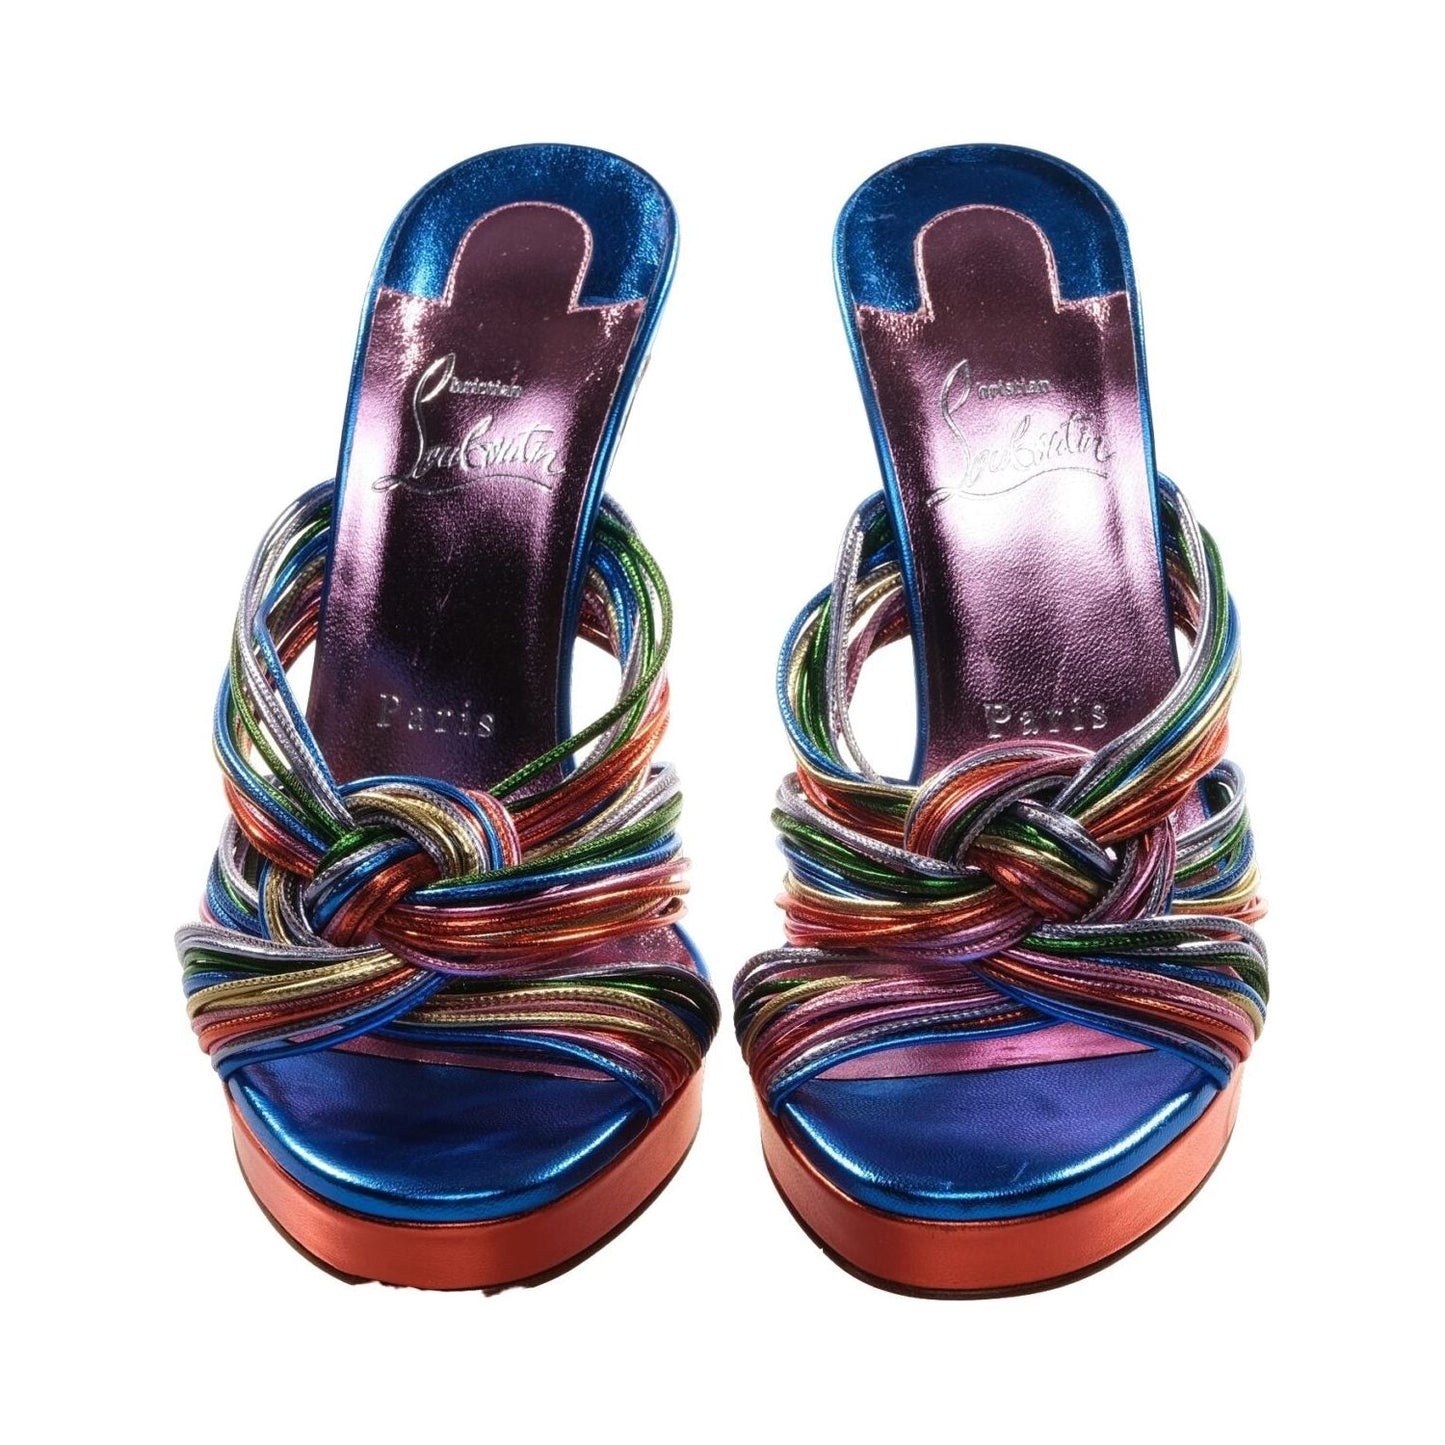 Multitaski Alta 120 Multicoloured Leather Knotted Strappy High Heel Mules